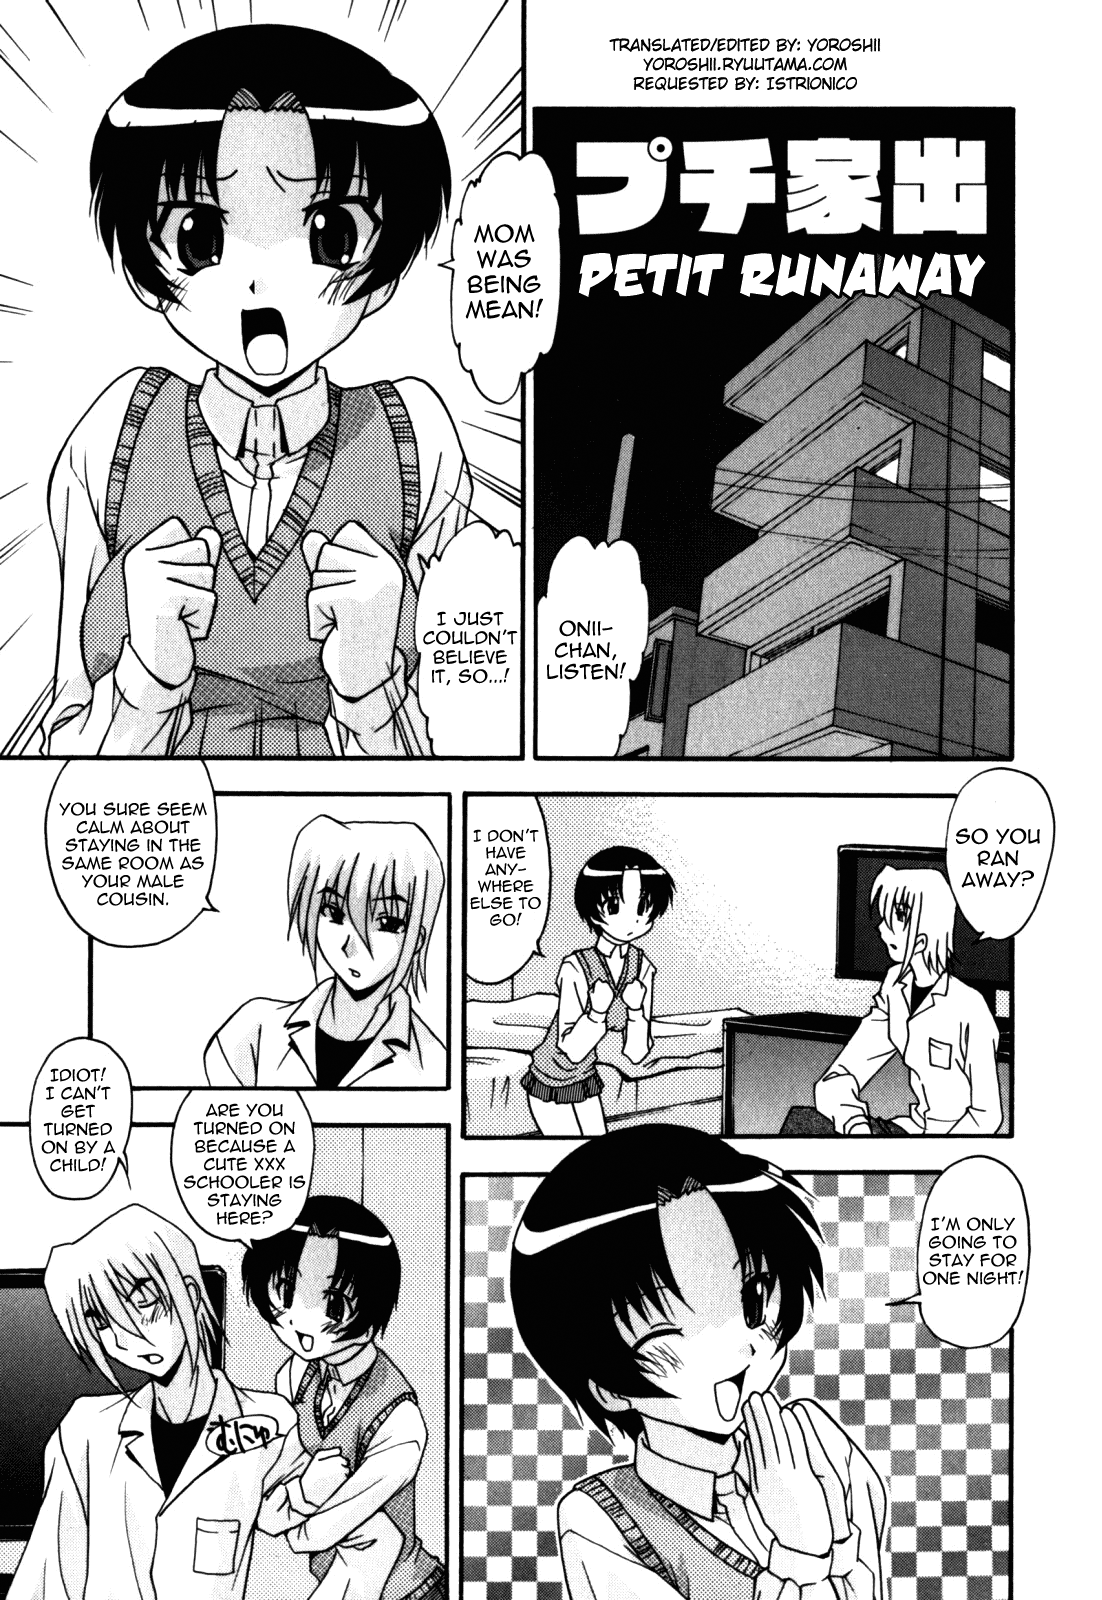 Sex And The Sister Vol.1 Chapter 8: Petit Runaway - Picture 1